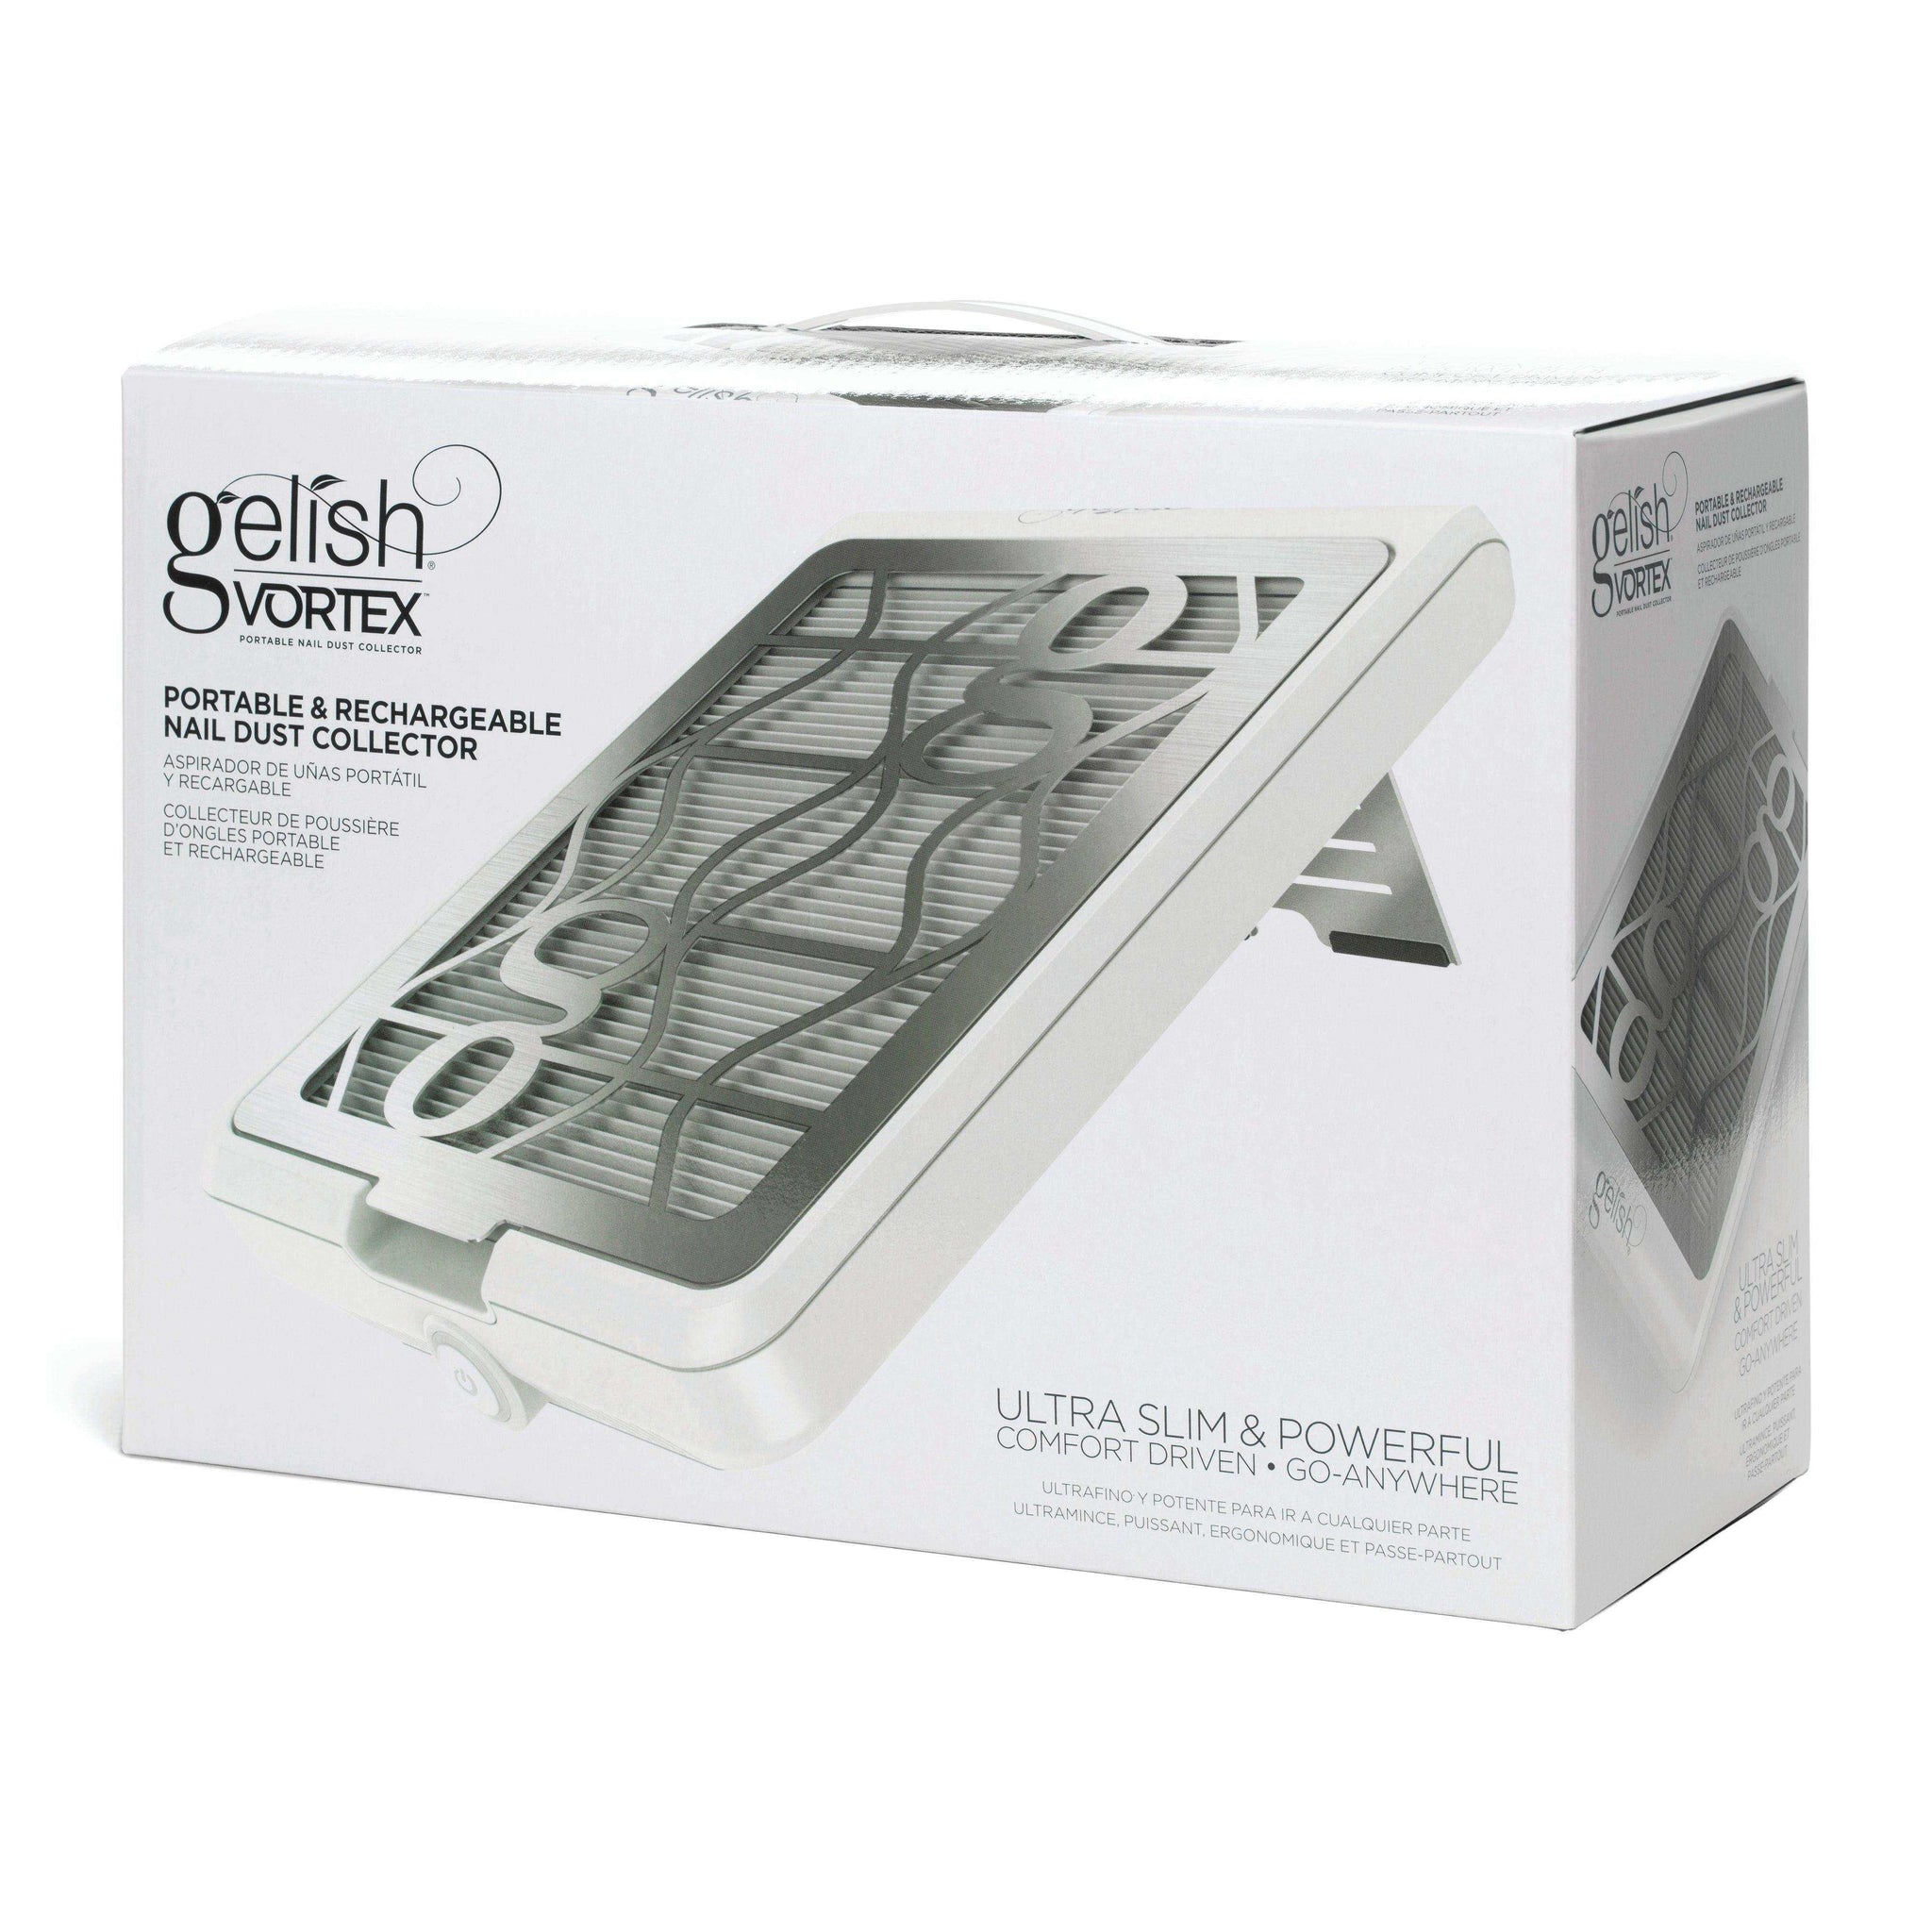 Gelish Vortex Portable & Rechargeable Nail Dust Collector